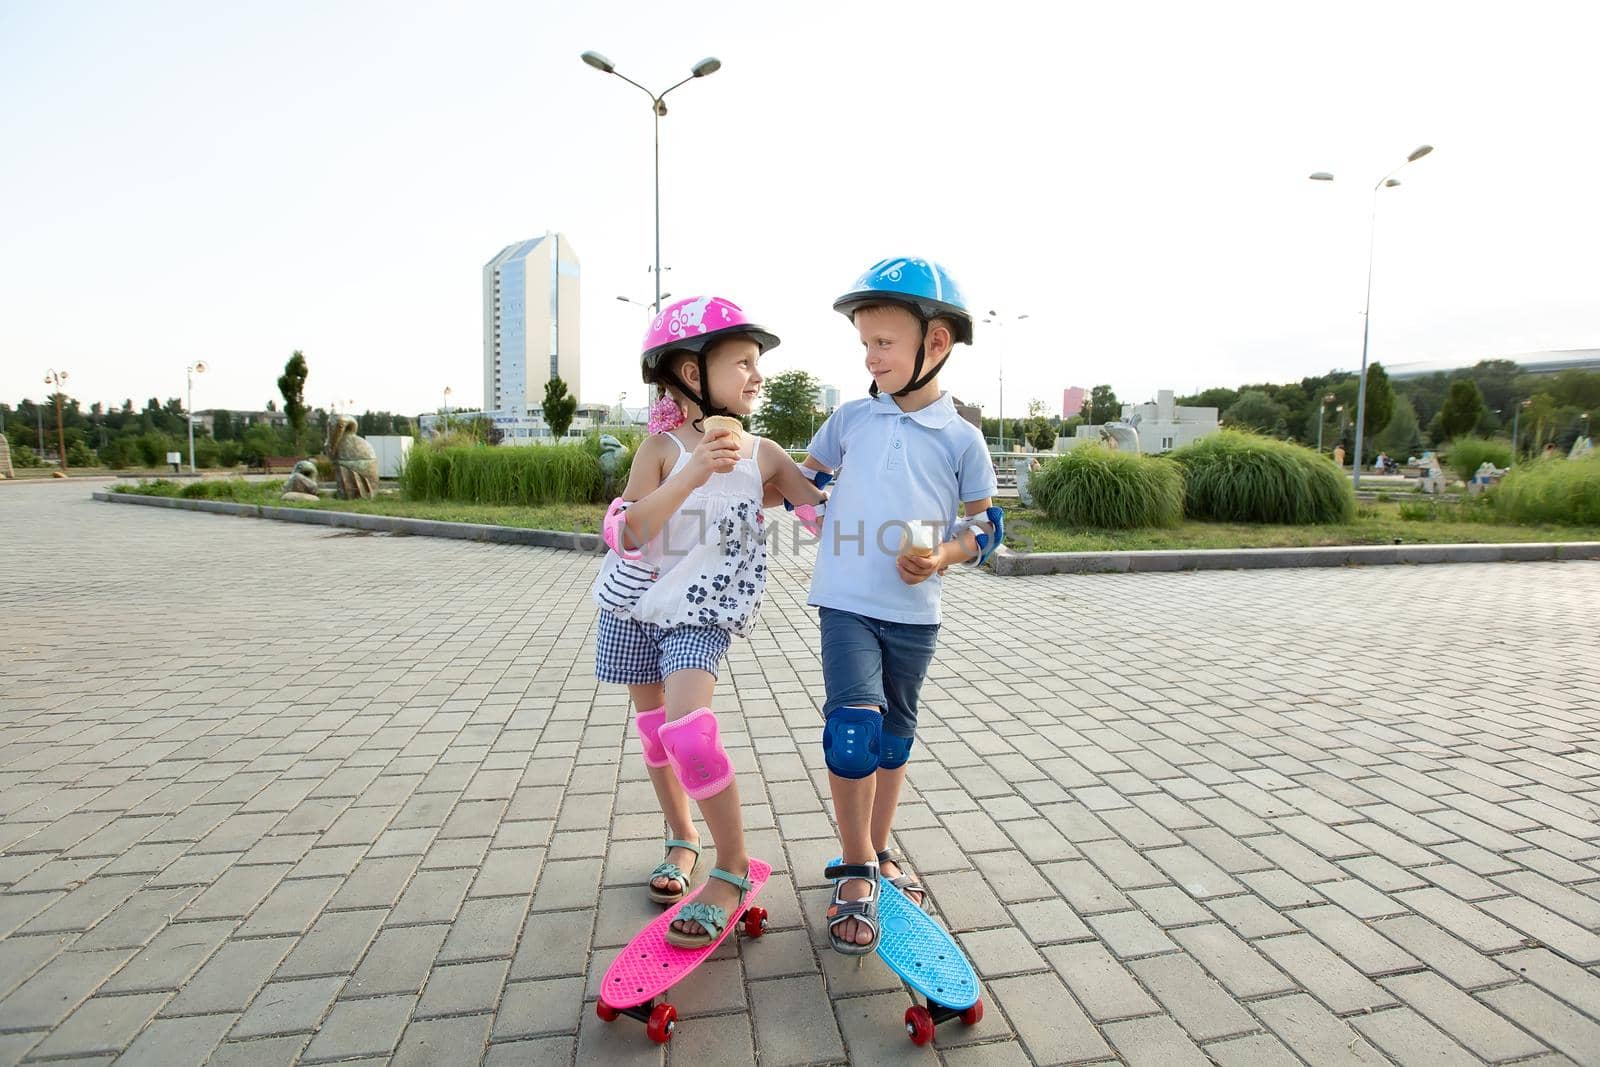 Little boy in a helmet hugs a girl in the Park, they ride a skateboard and eat ice cream